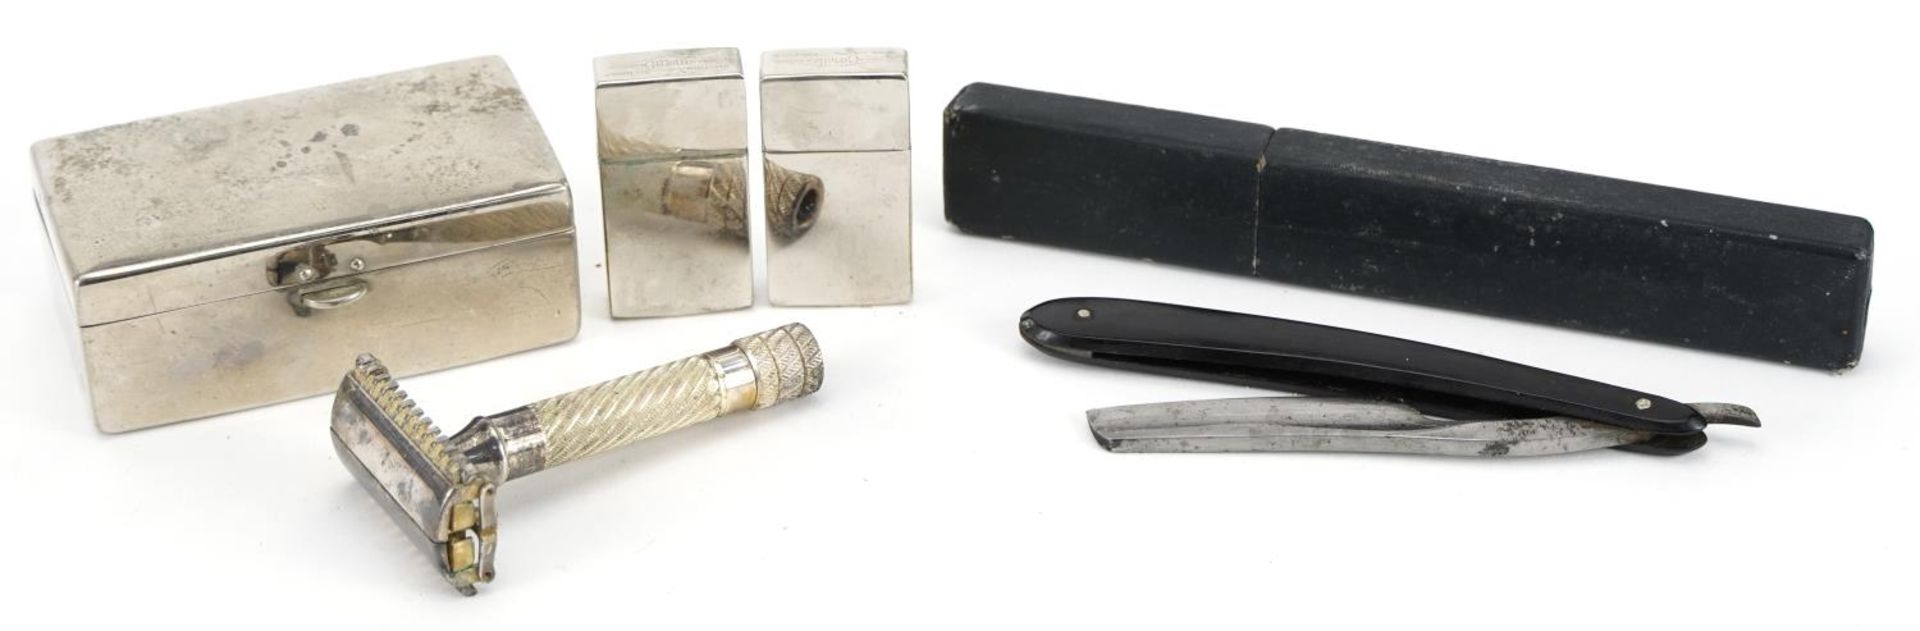 Vintage Gillette travelling razor housed in a stainless steel case made in Canada together with a